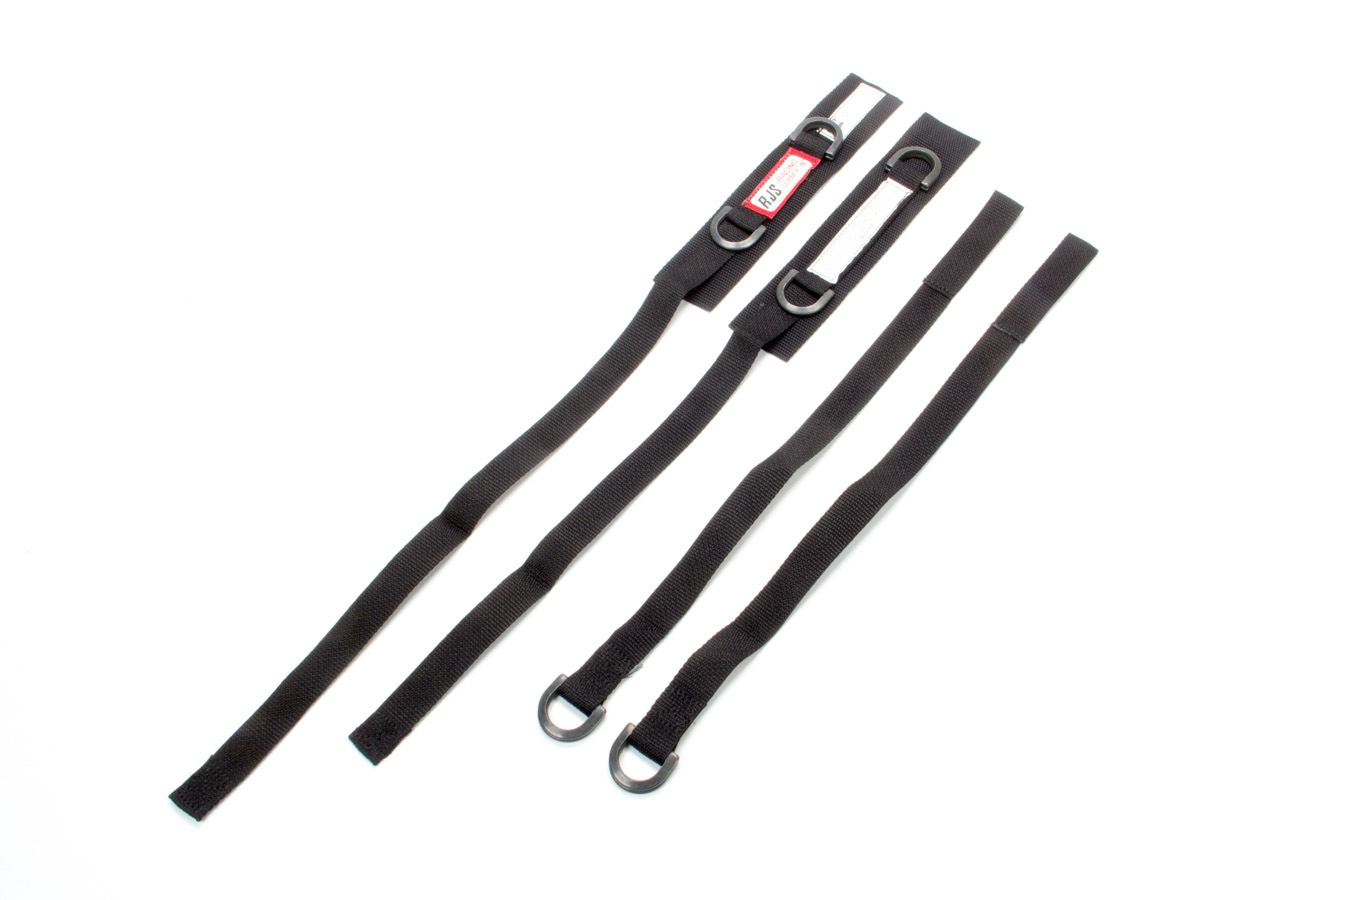 RJS Safety 11000301 Arm Restraint Harness, SFI 3.3, Individual Straps, 1 in D-Ring, Black, Pair